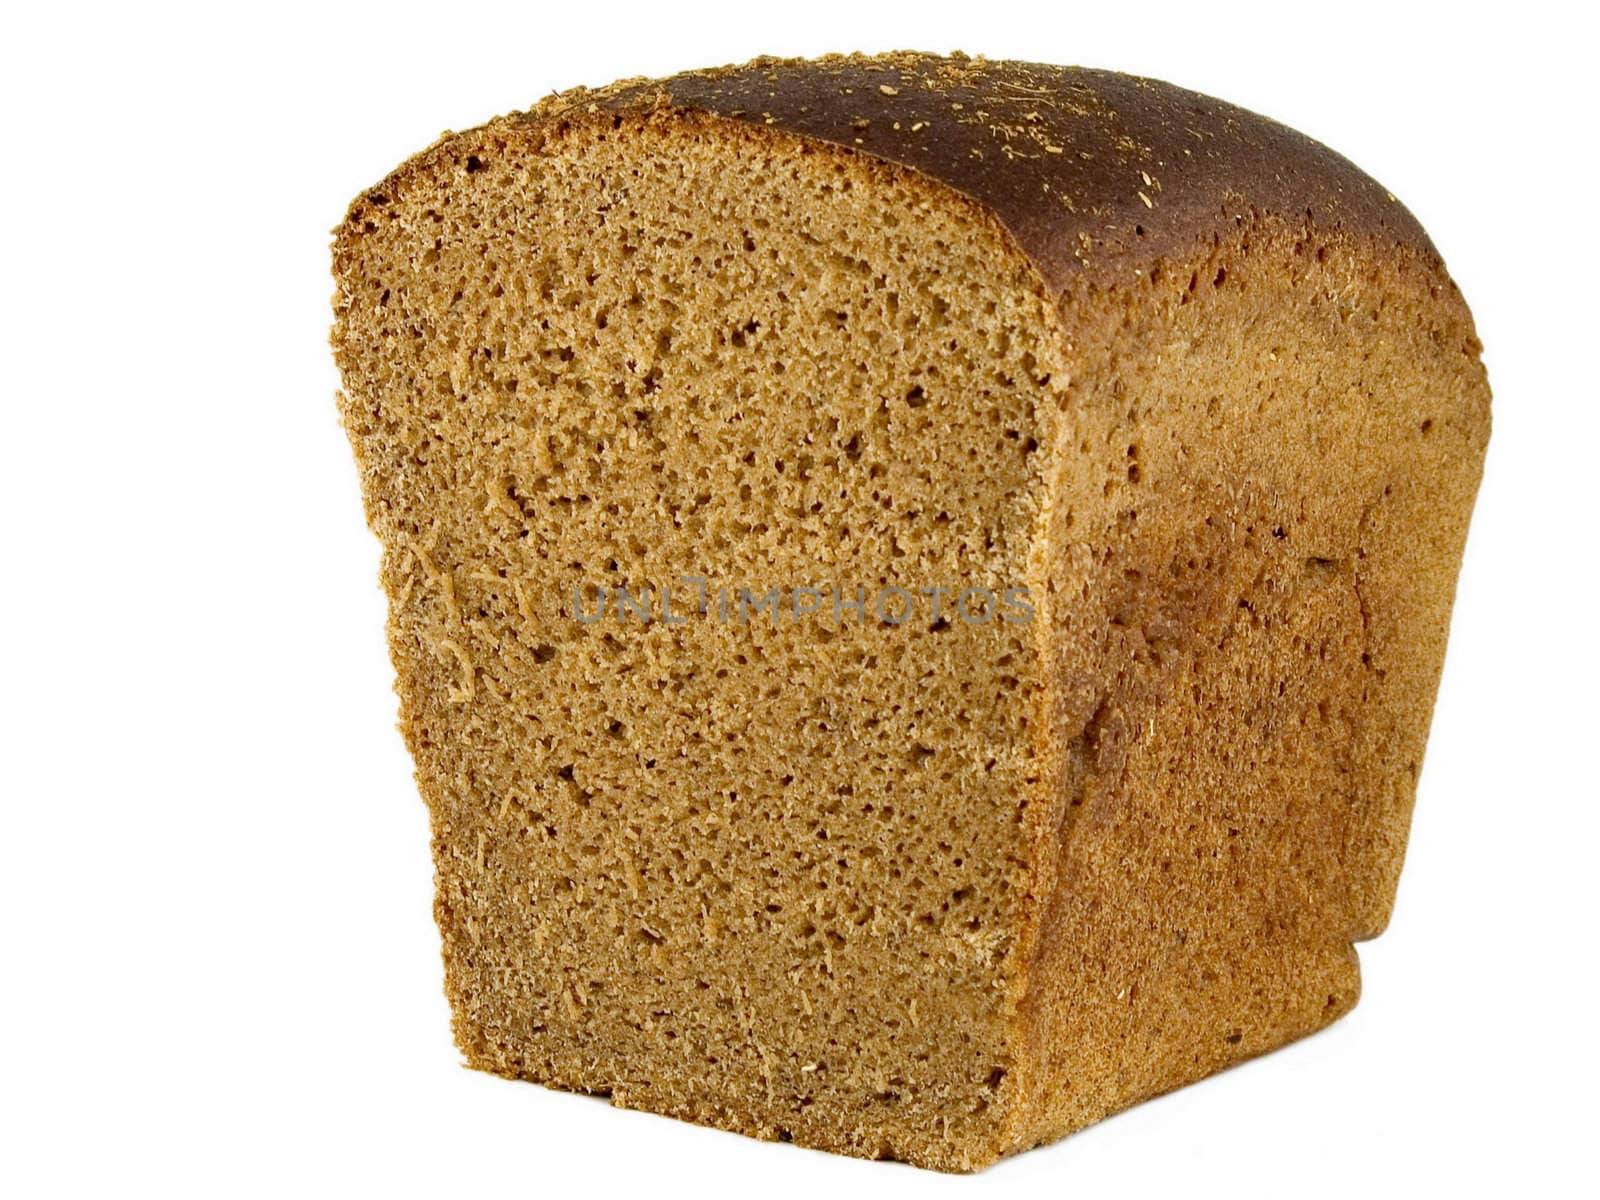 Rye bread isolated on white background by Baltus